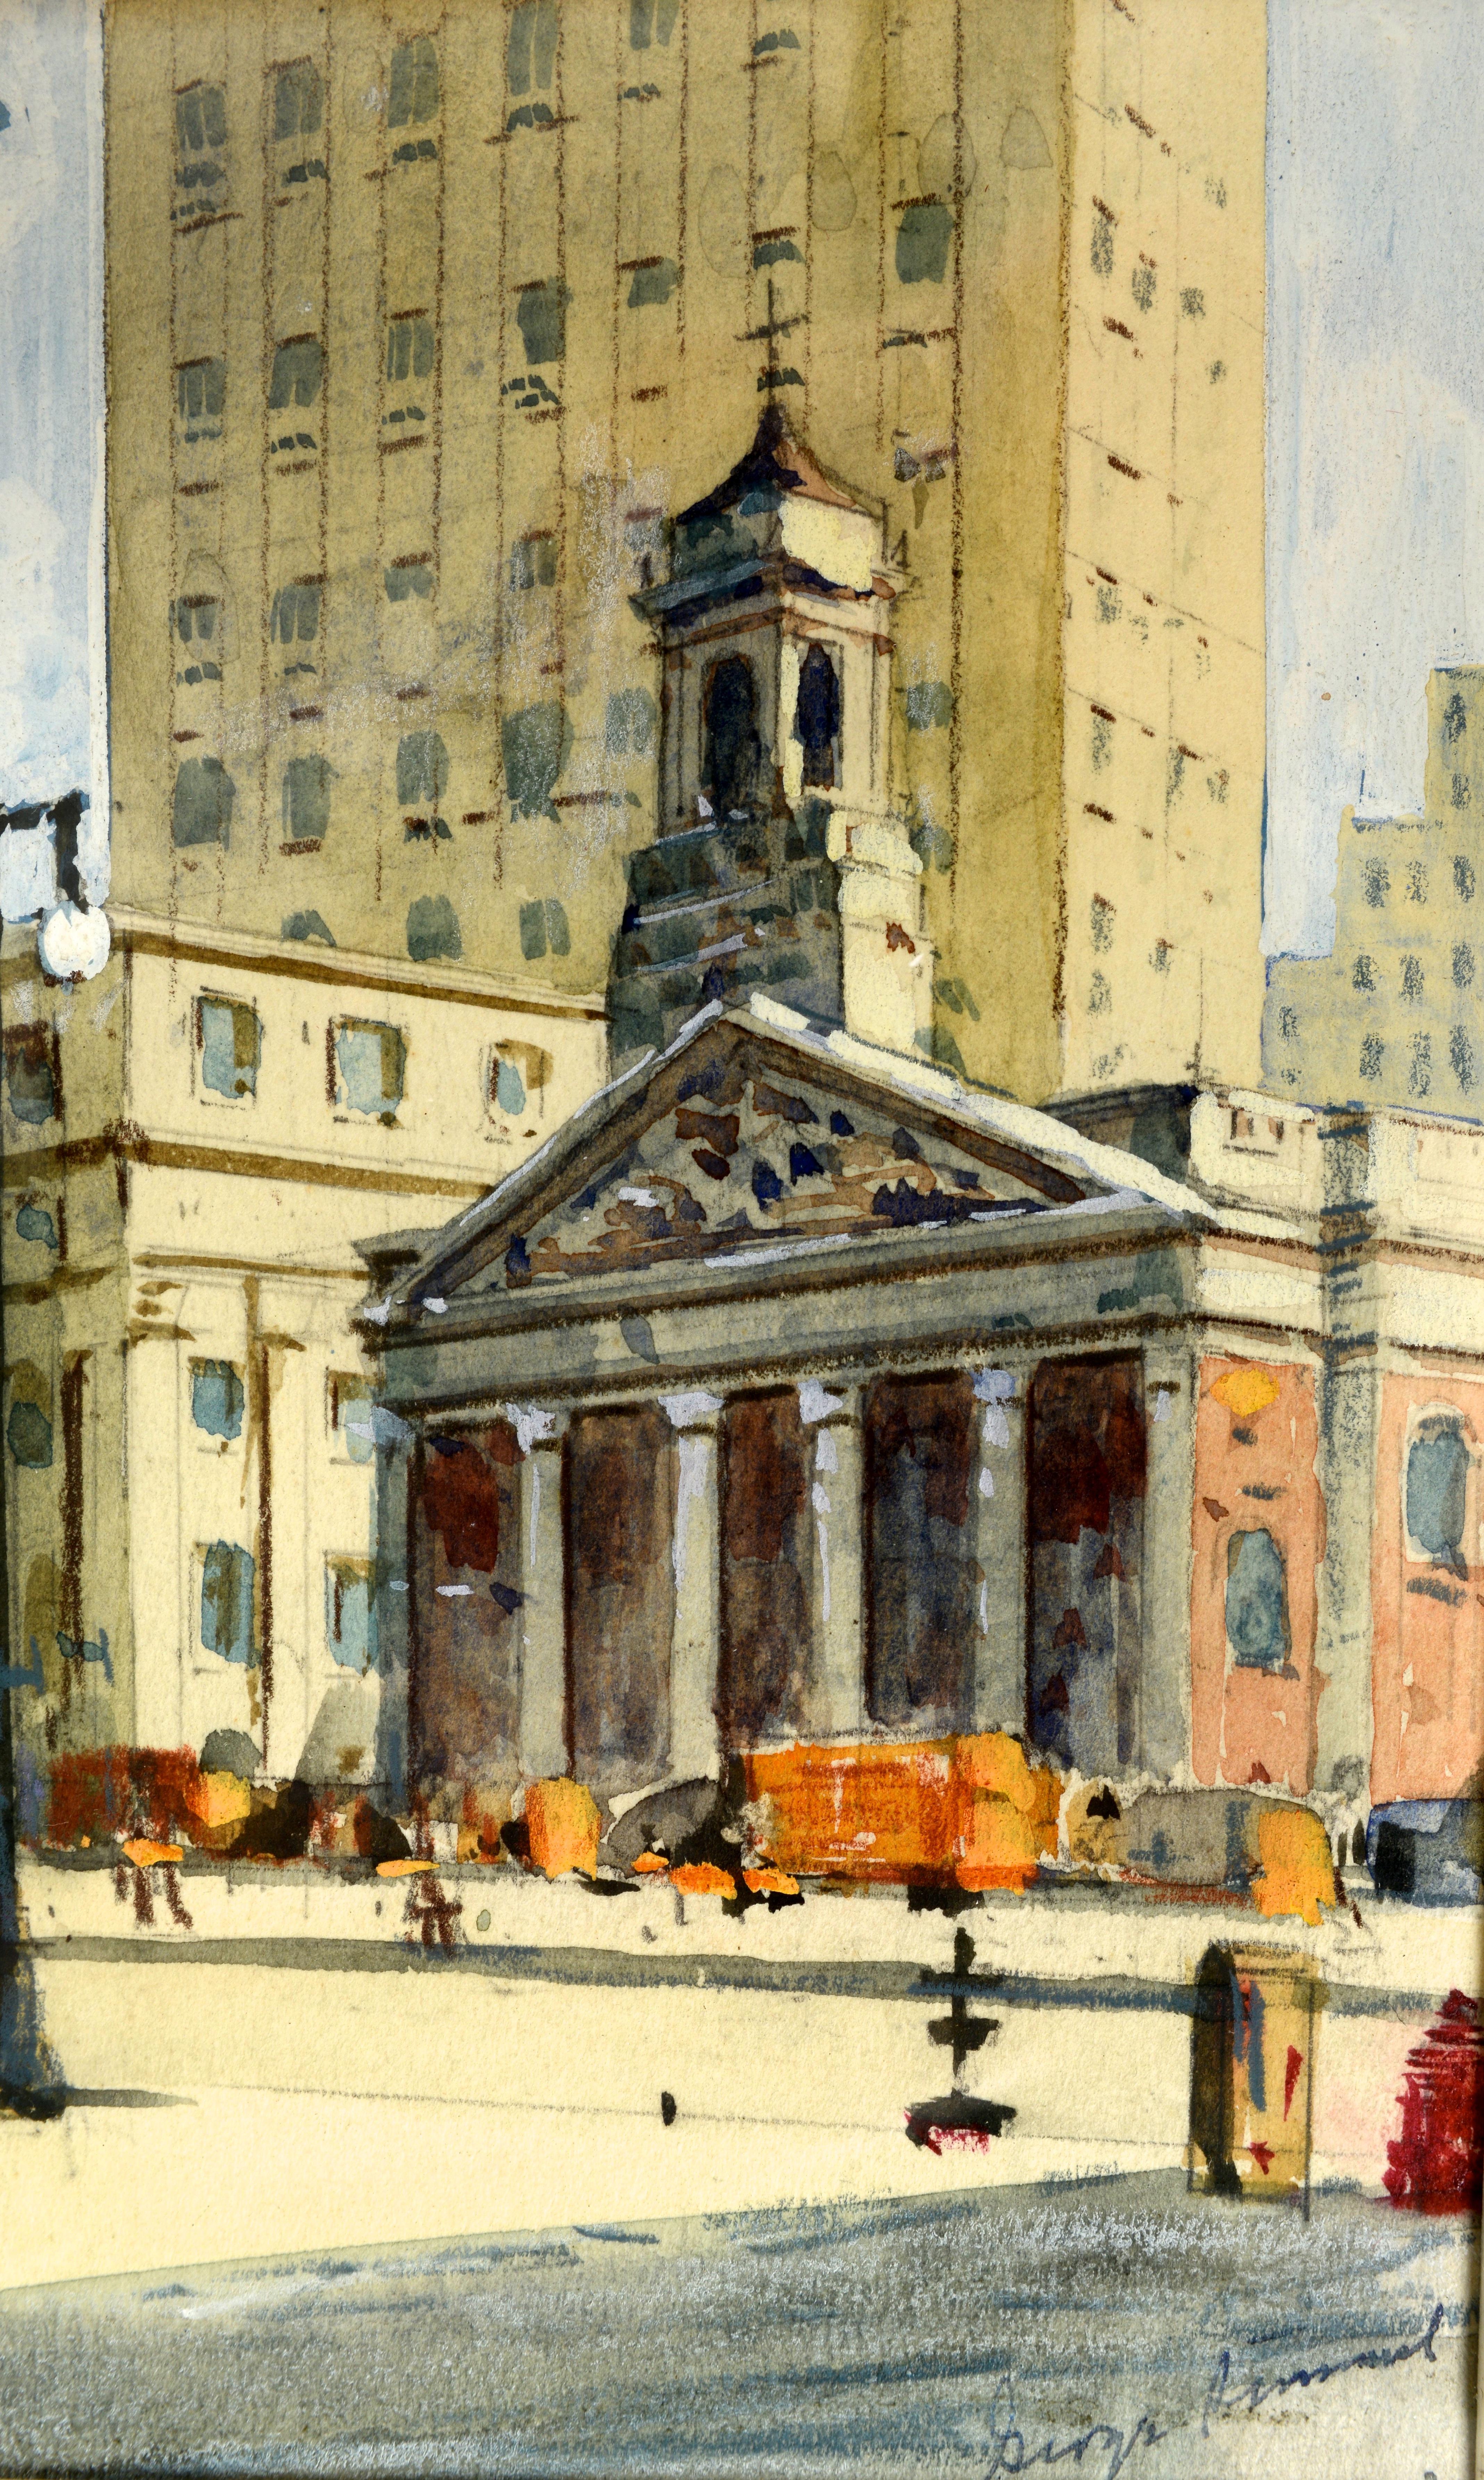 Framed Watercolor of St Andrew's Roman Catholic Church, Manhattan. St. Andrew's Roman Catholic Church located at 27 Duane Street, also known as St. Andrew's Plaza and more recently as Cardinal Hayes Place, is off of Foley Square in the Civic Center